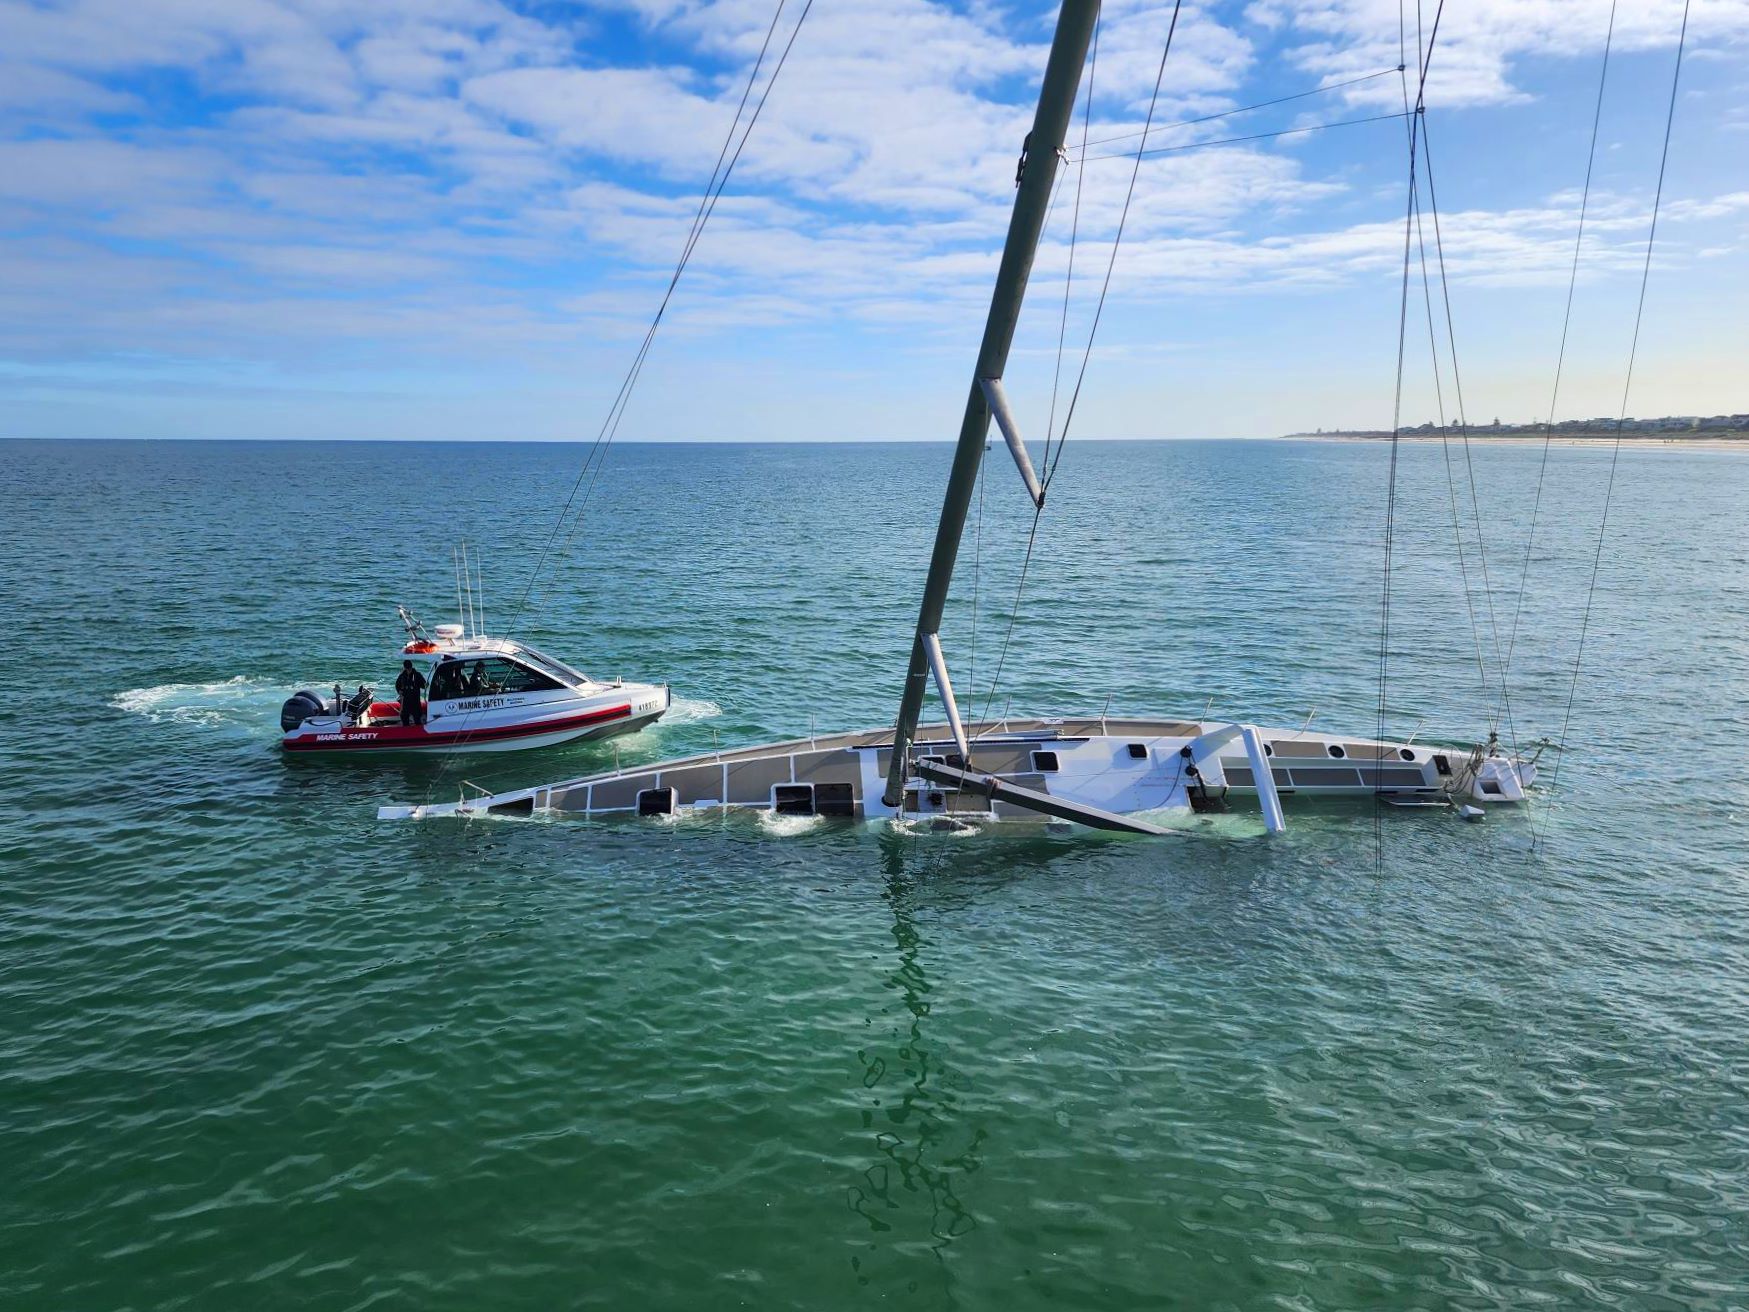 Yacht half submerged in the ocean with Marine Safety vessel close by in the water